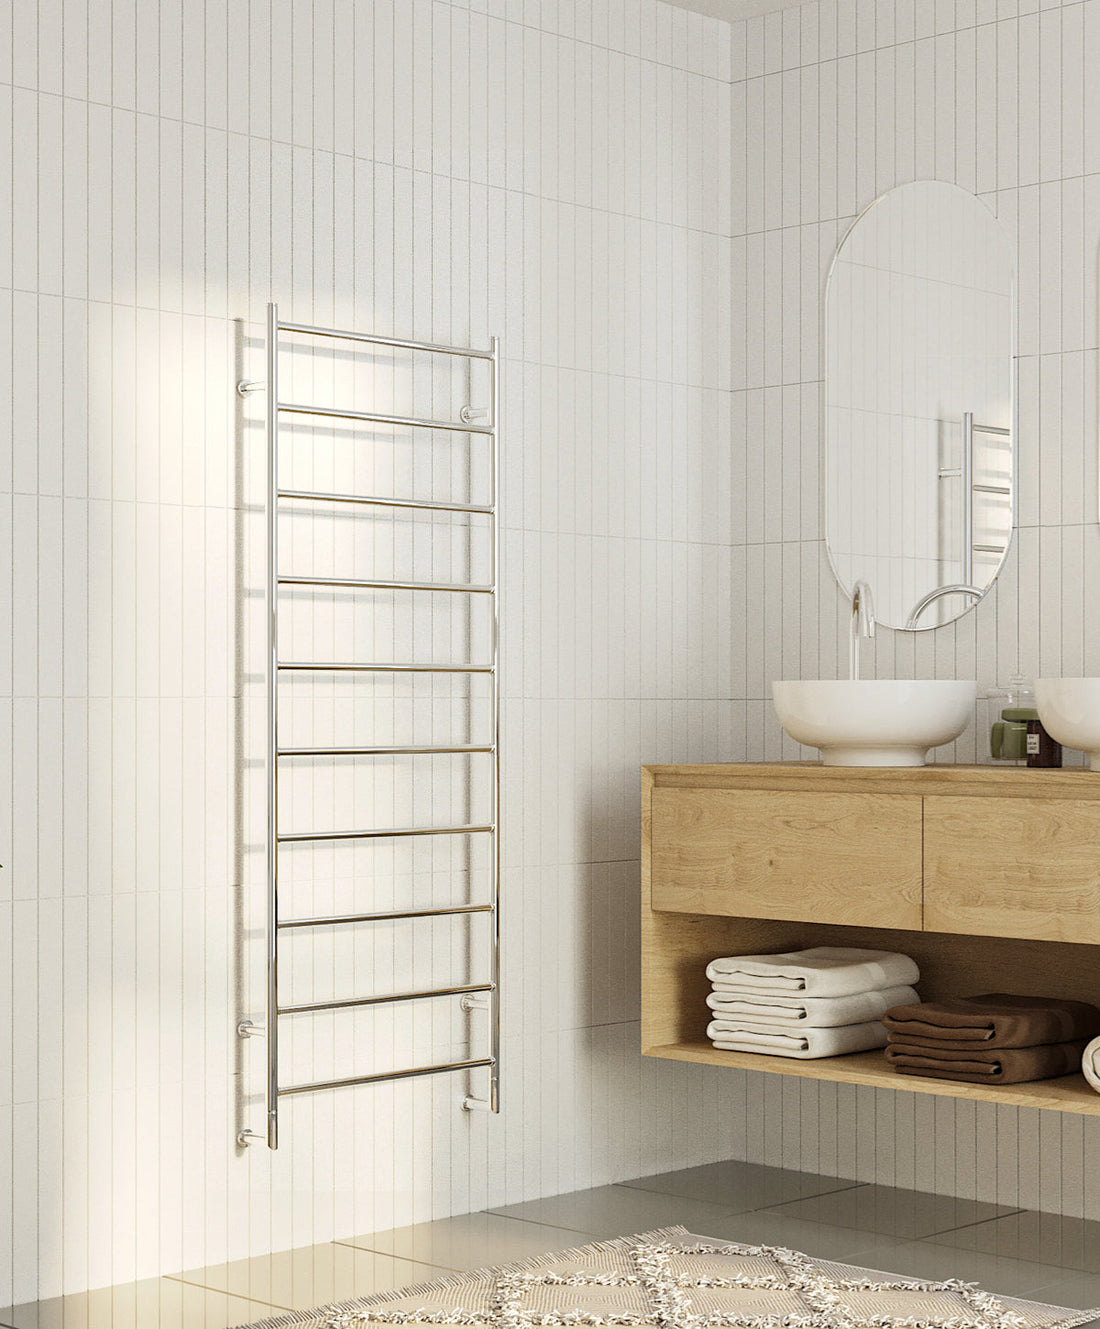 HYDROTHERM TR Series - TR3 Model Towel Rail (Non Electric)